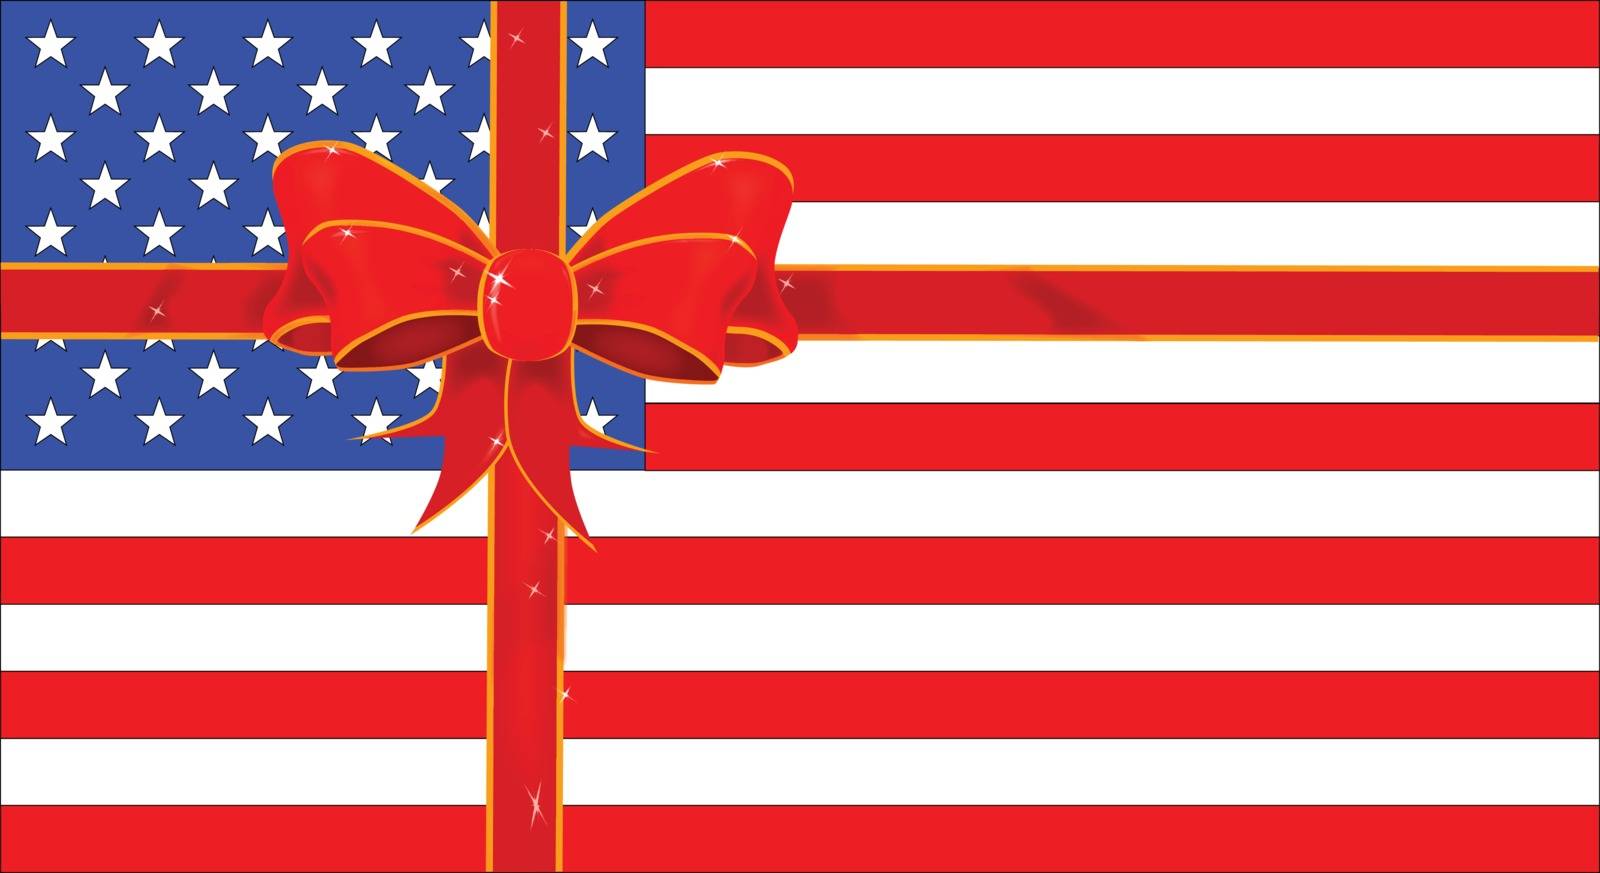 A parcel with red and gold ribbon isolated over a USA flag background.